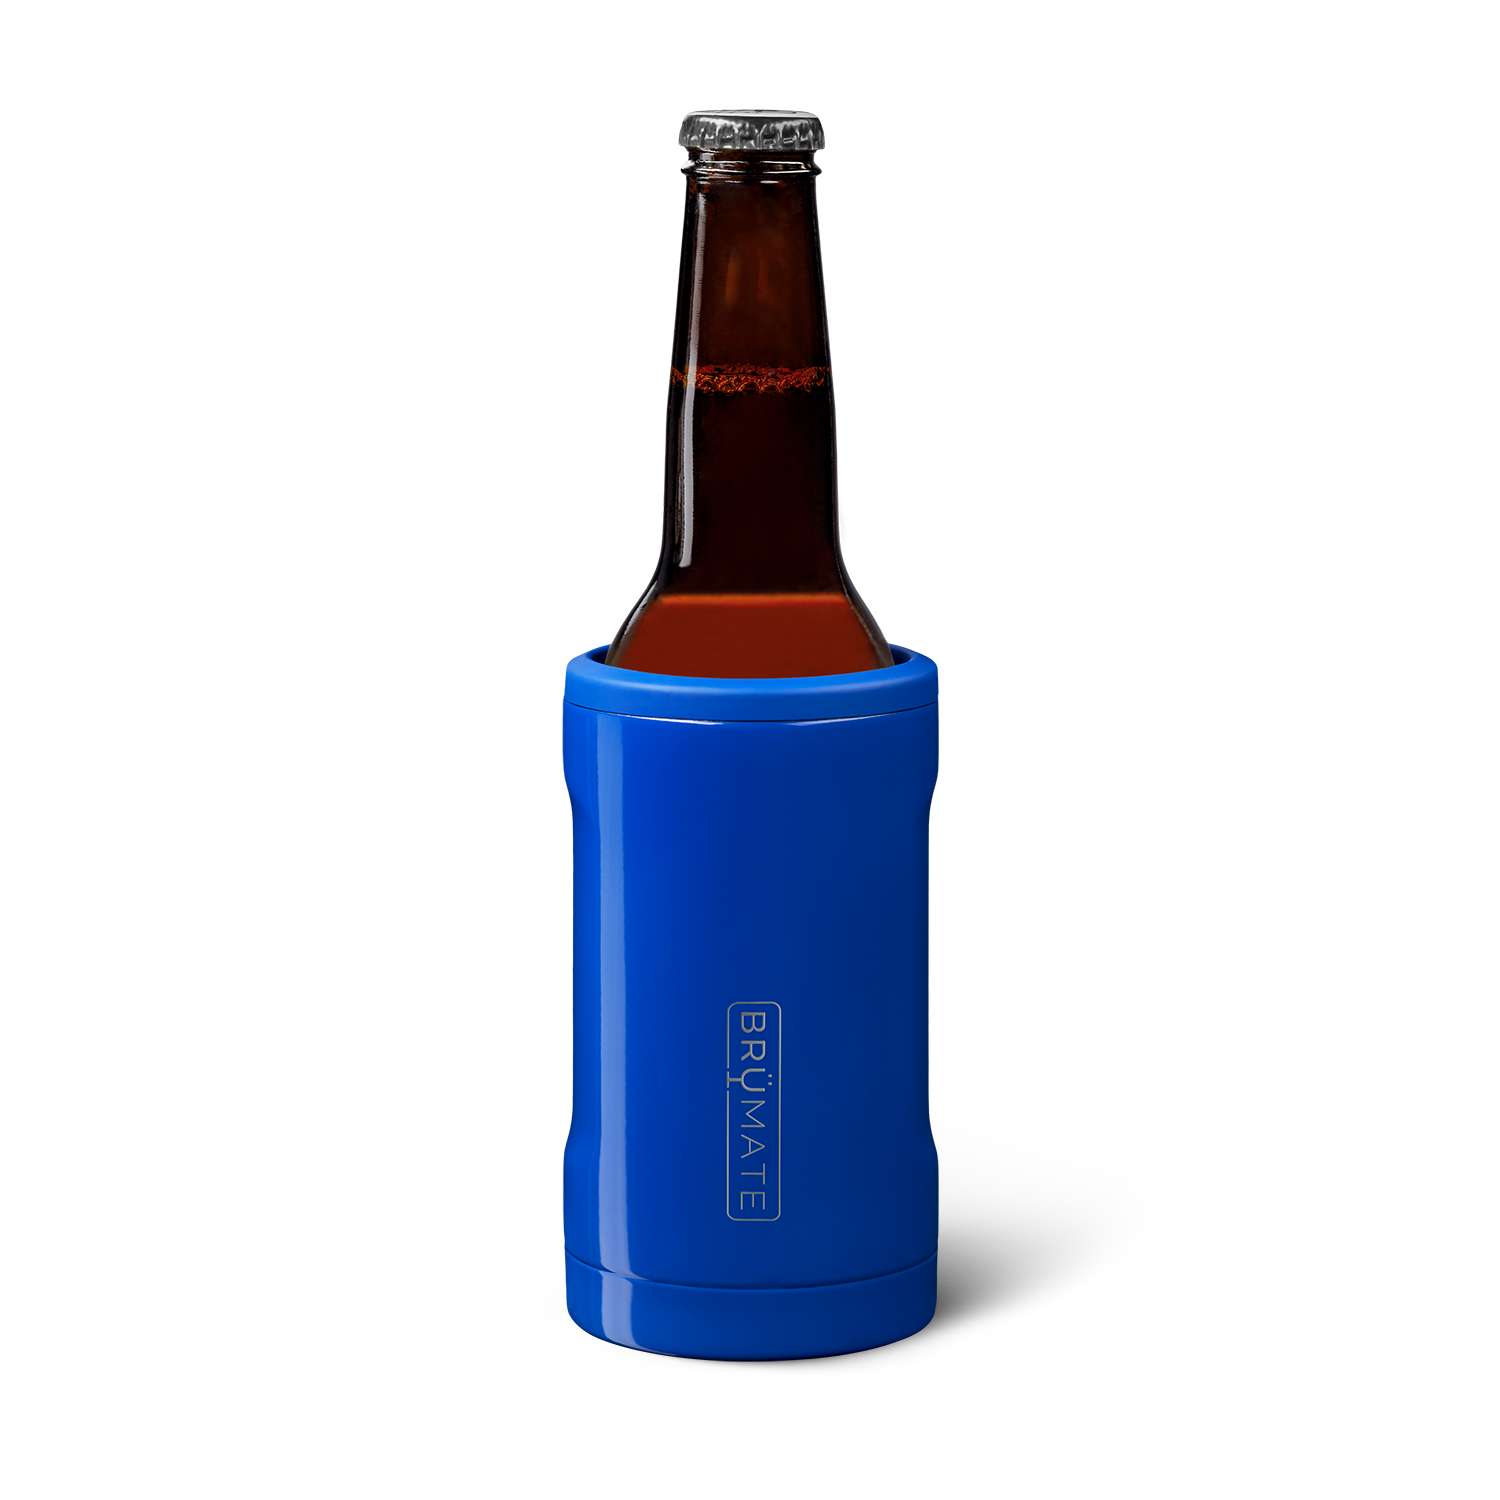 World's Best Dad Can Cooler (Royal)